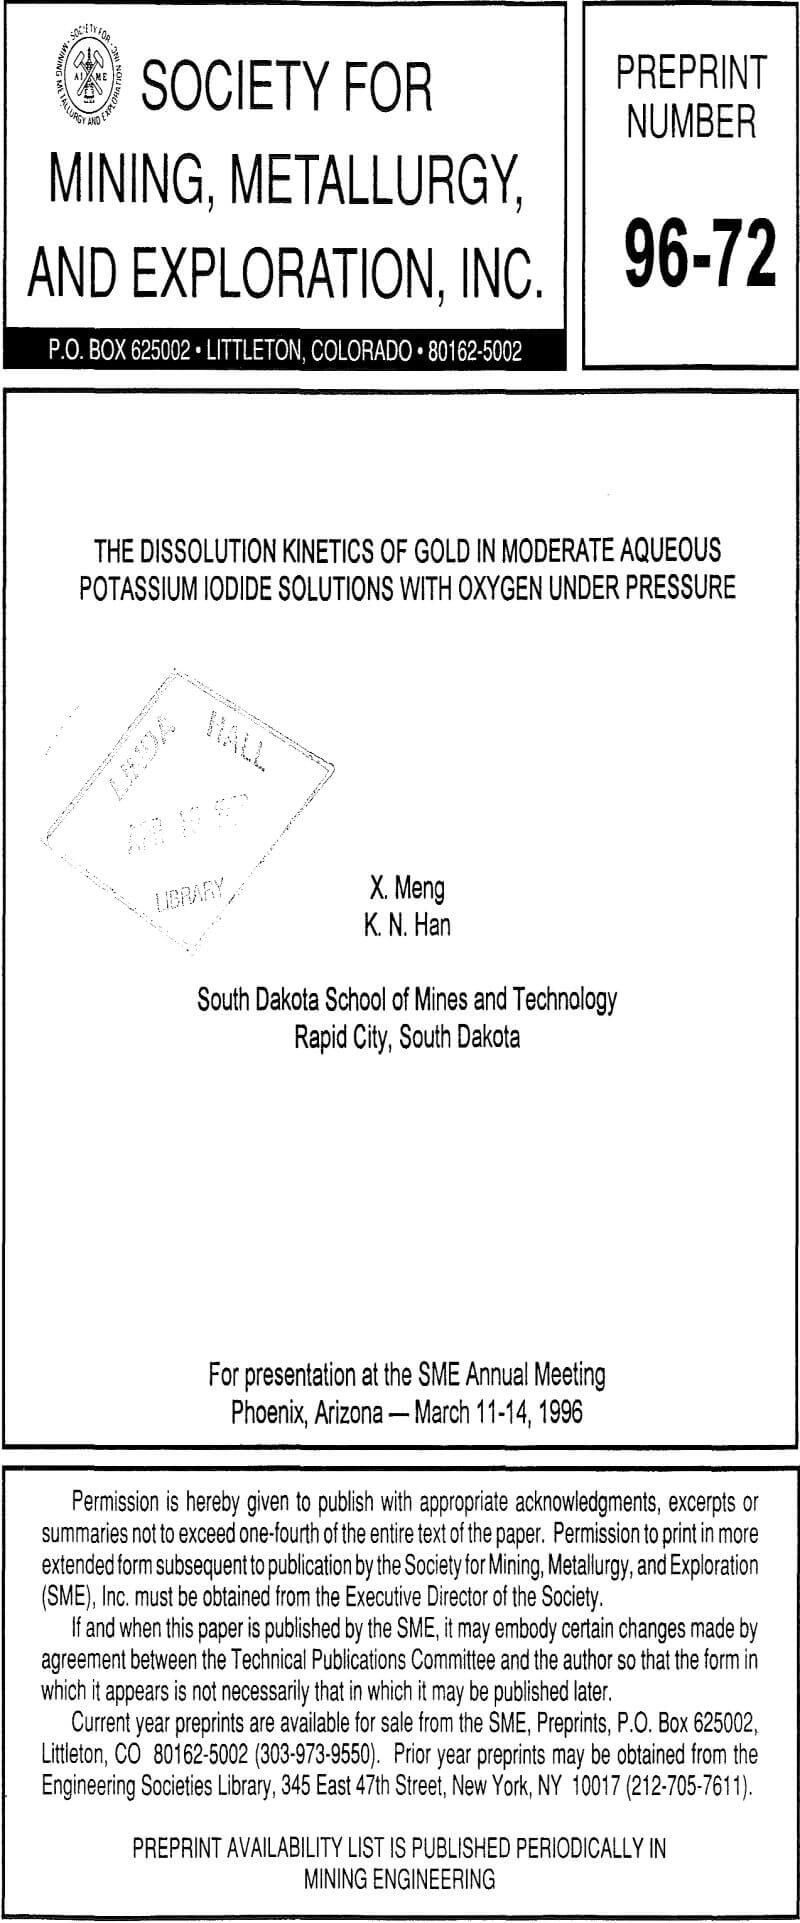 the dissolution kinetics of gold in moderate aqueous potassium iodide solutions with oxygen under pressure